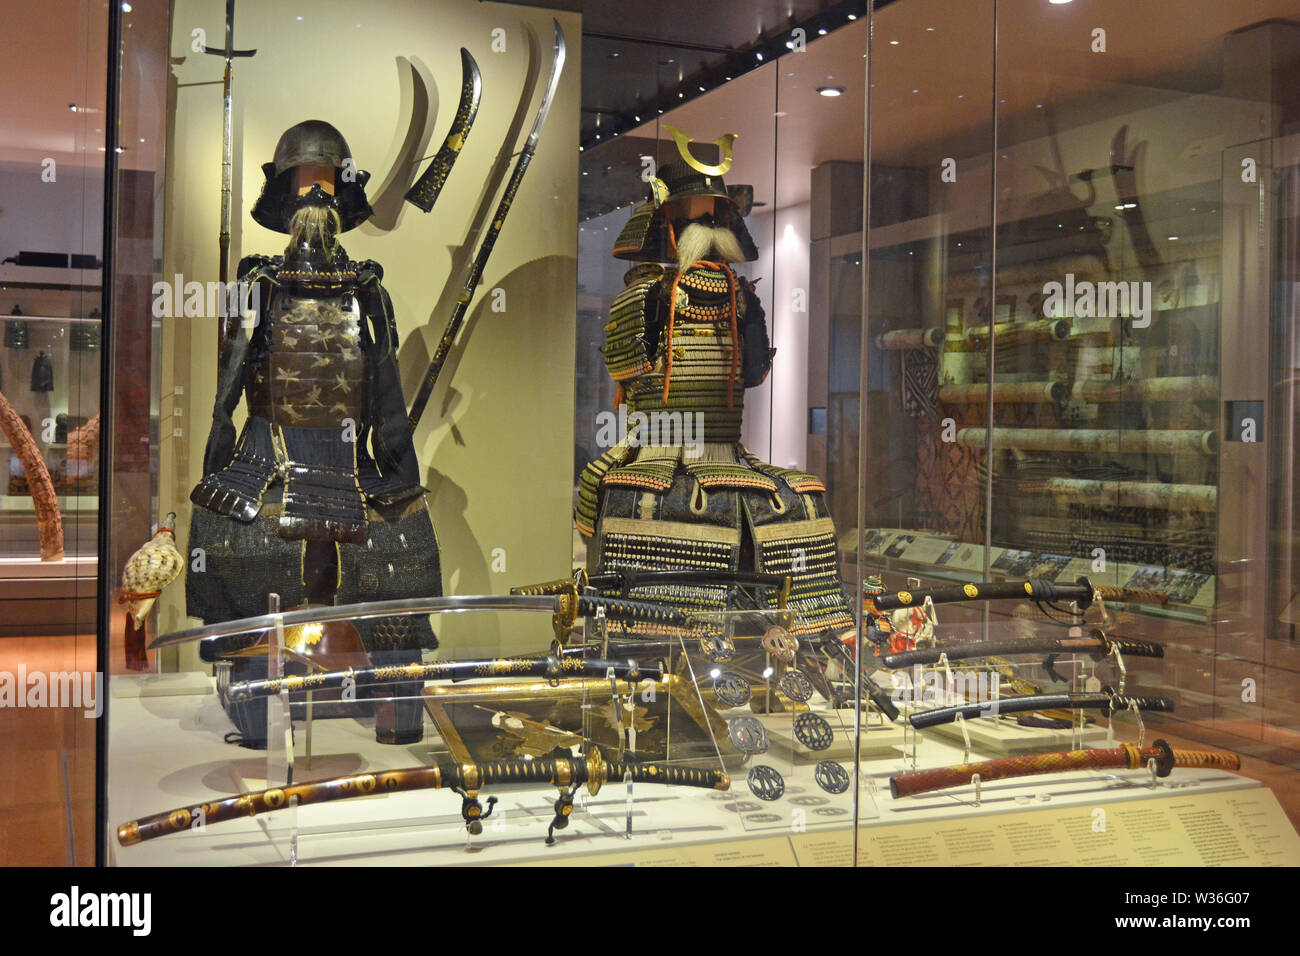 Japanese samurai warrior outfits on display at Manchester Museum, UK. Part of the University of Manchester Stock Photo